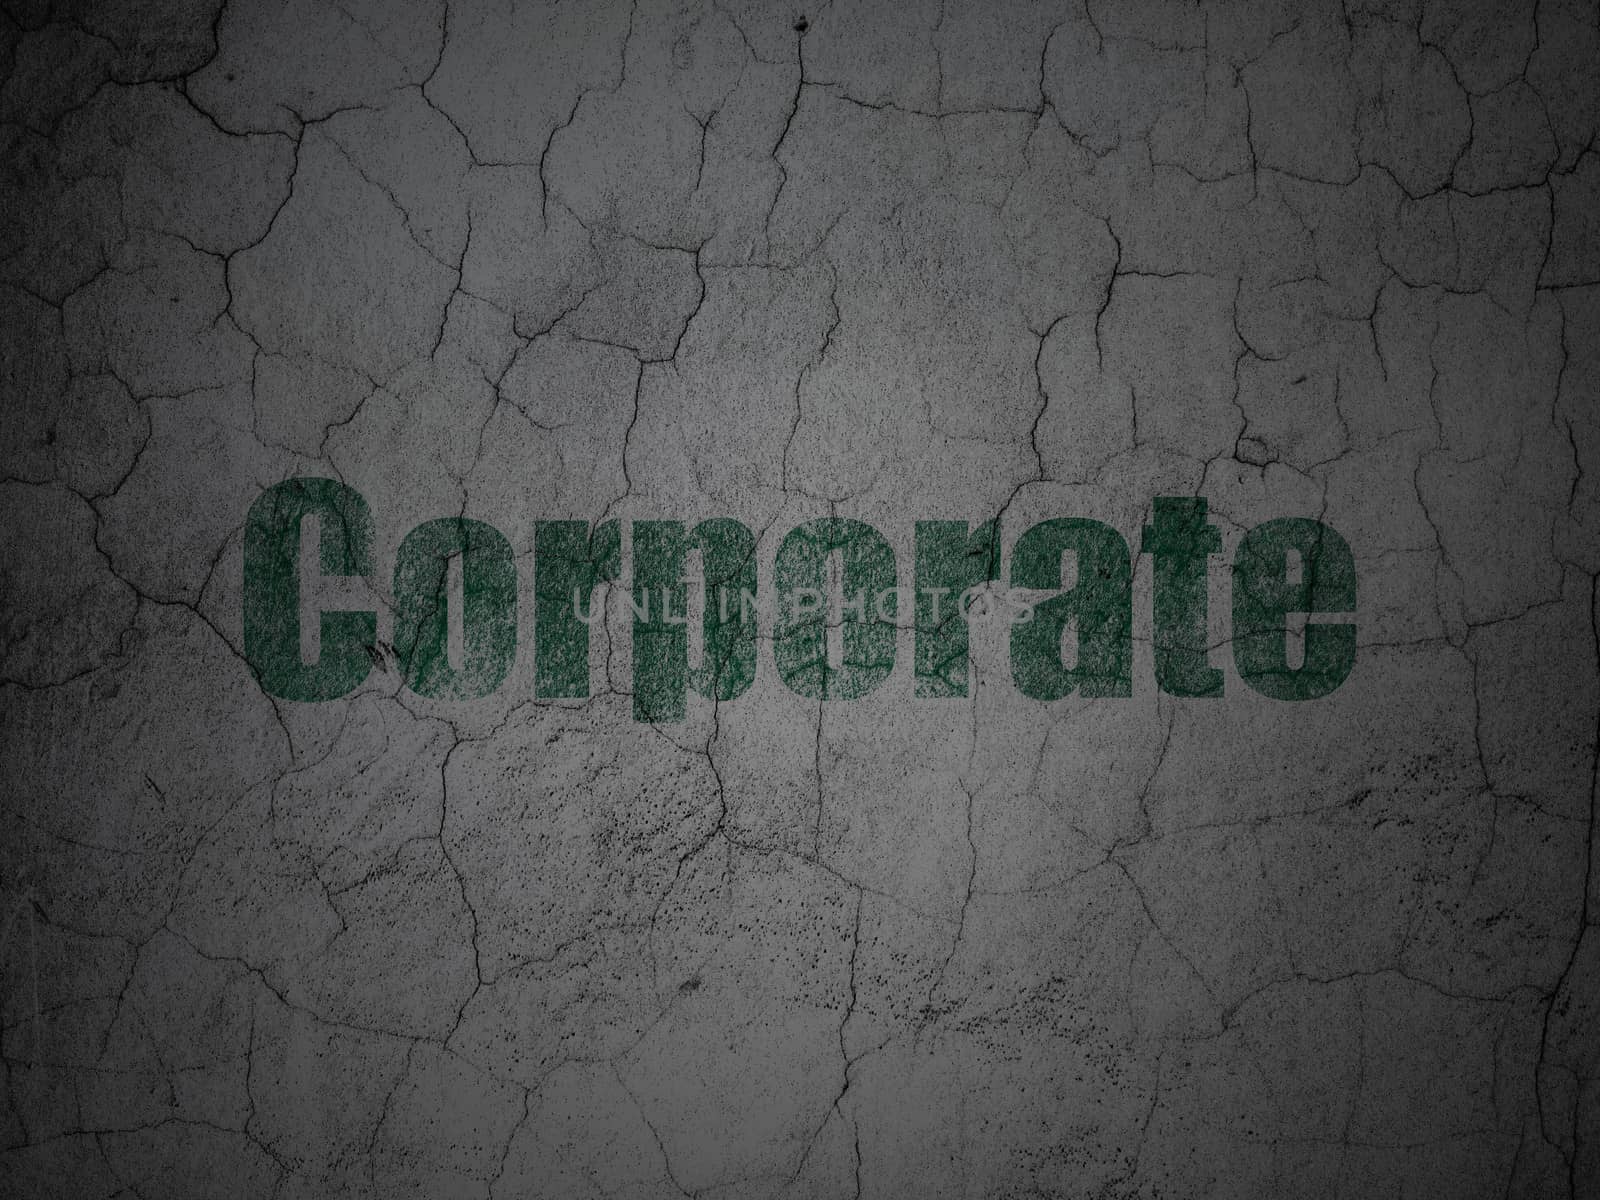 Finance concept: Green Corporate on grunge textured concrete wall background, 3d render